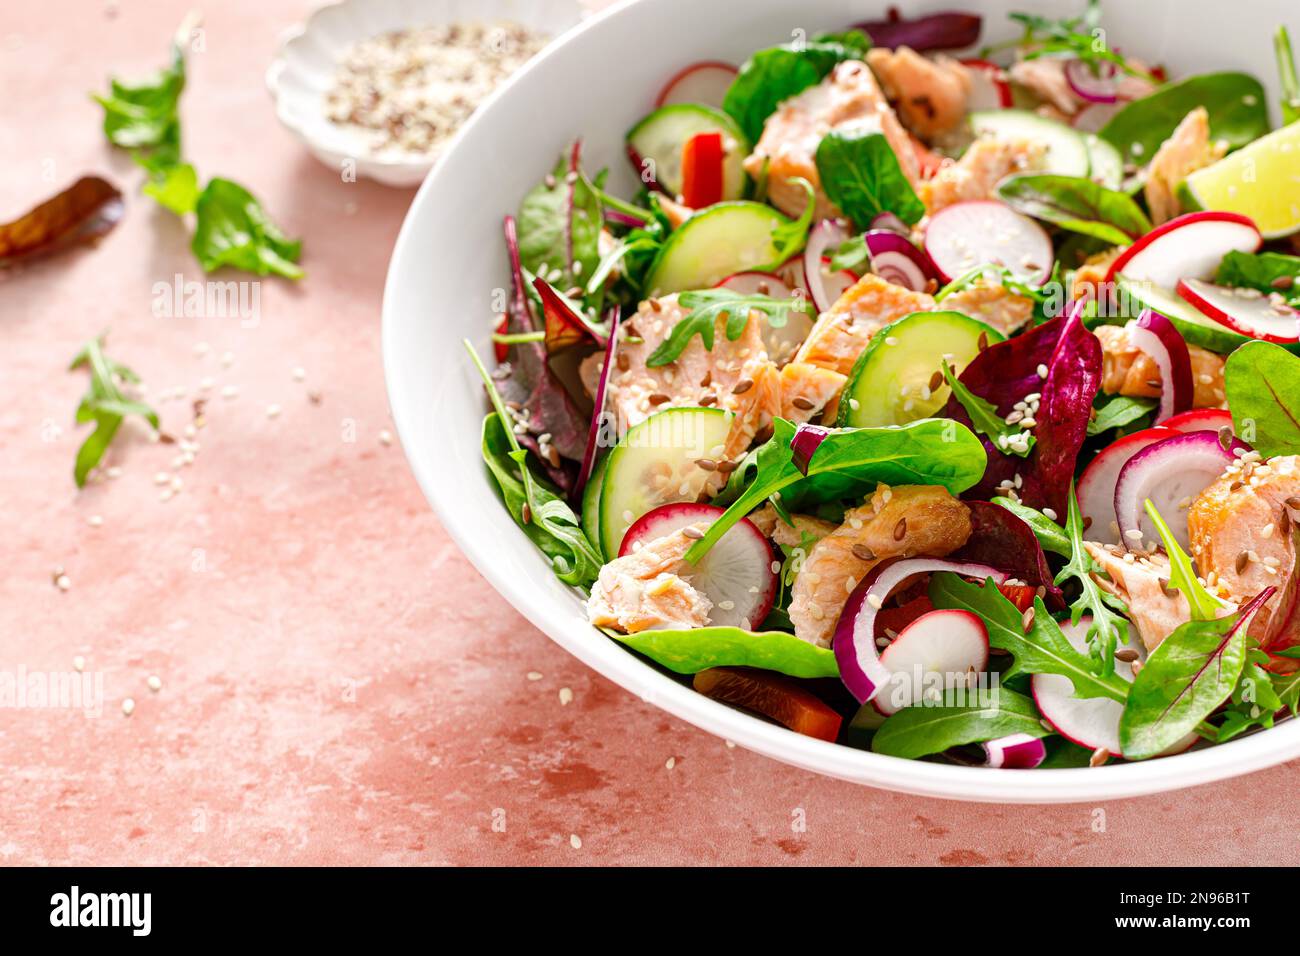 Salmon salad bowl with fresh radish, cucumber, red onion and green mixed leafy vegetables. Healthy diet food, lunch menu Stock Photo